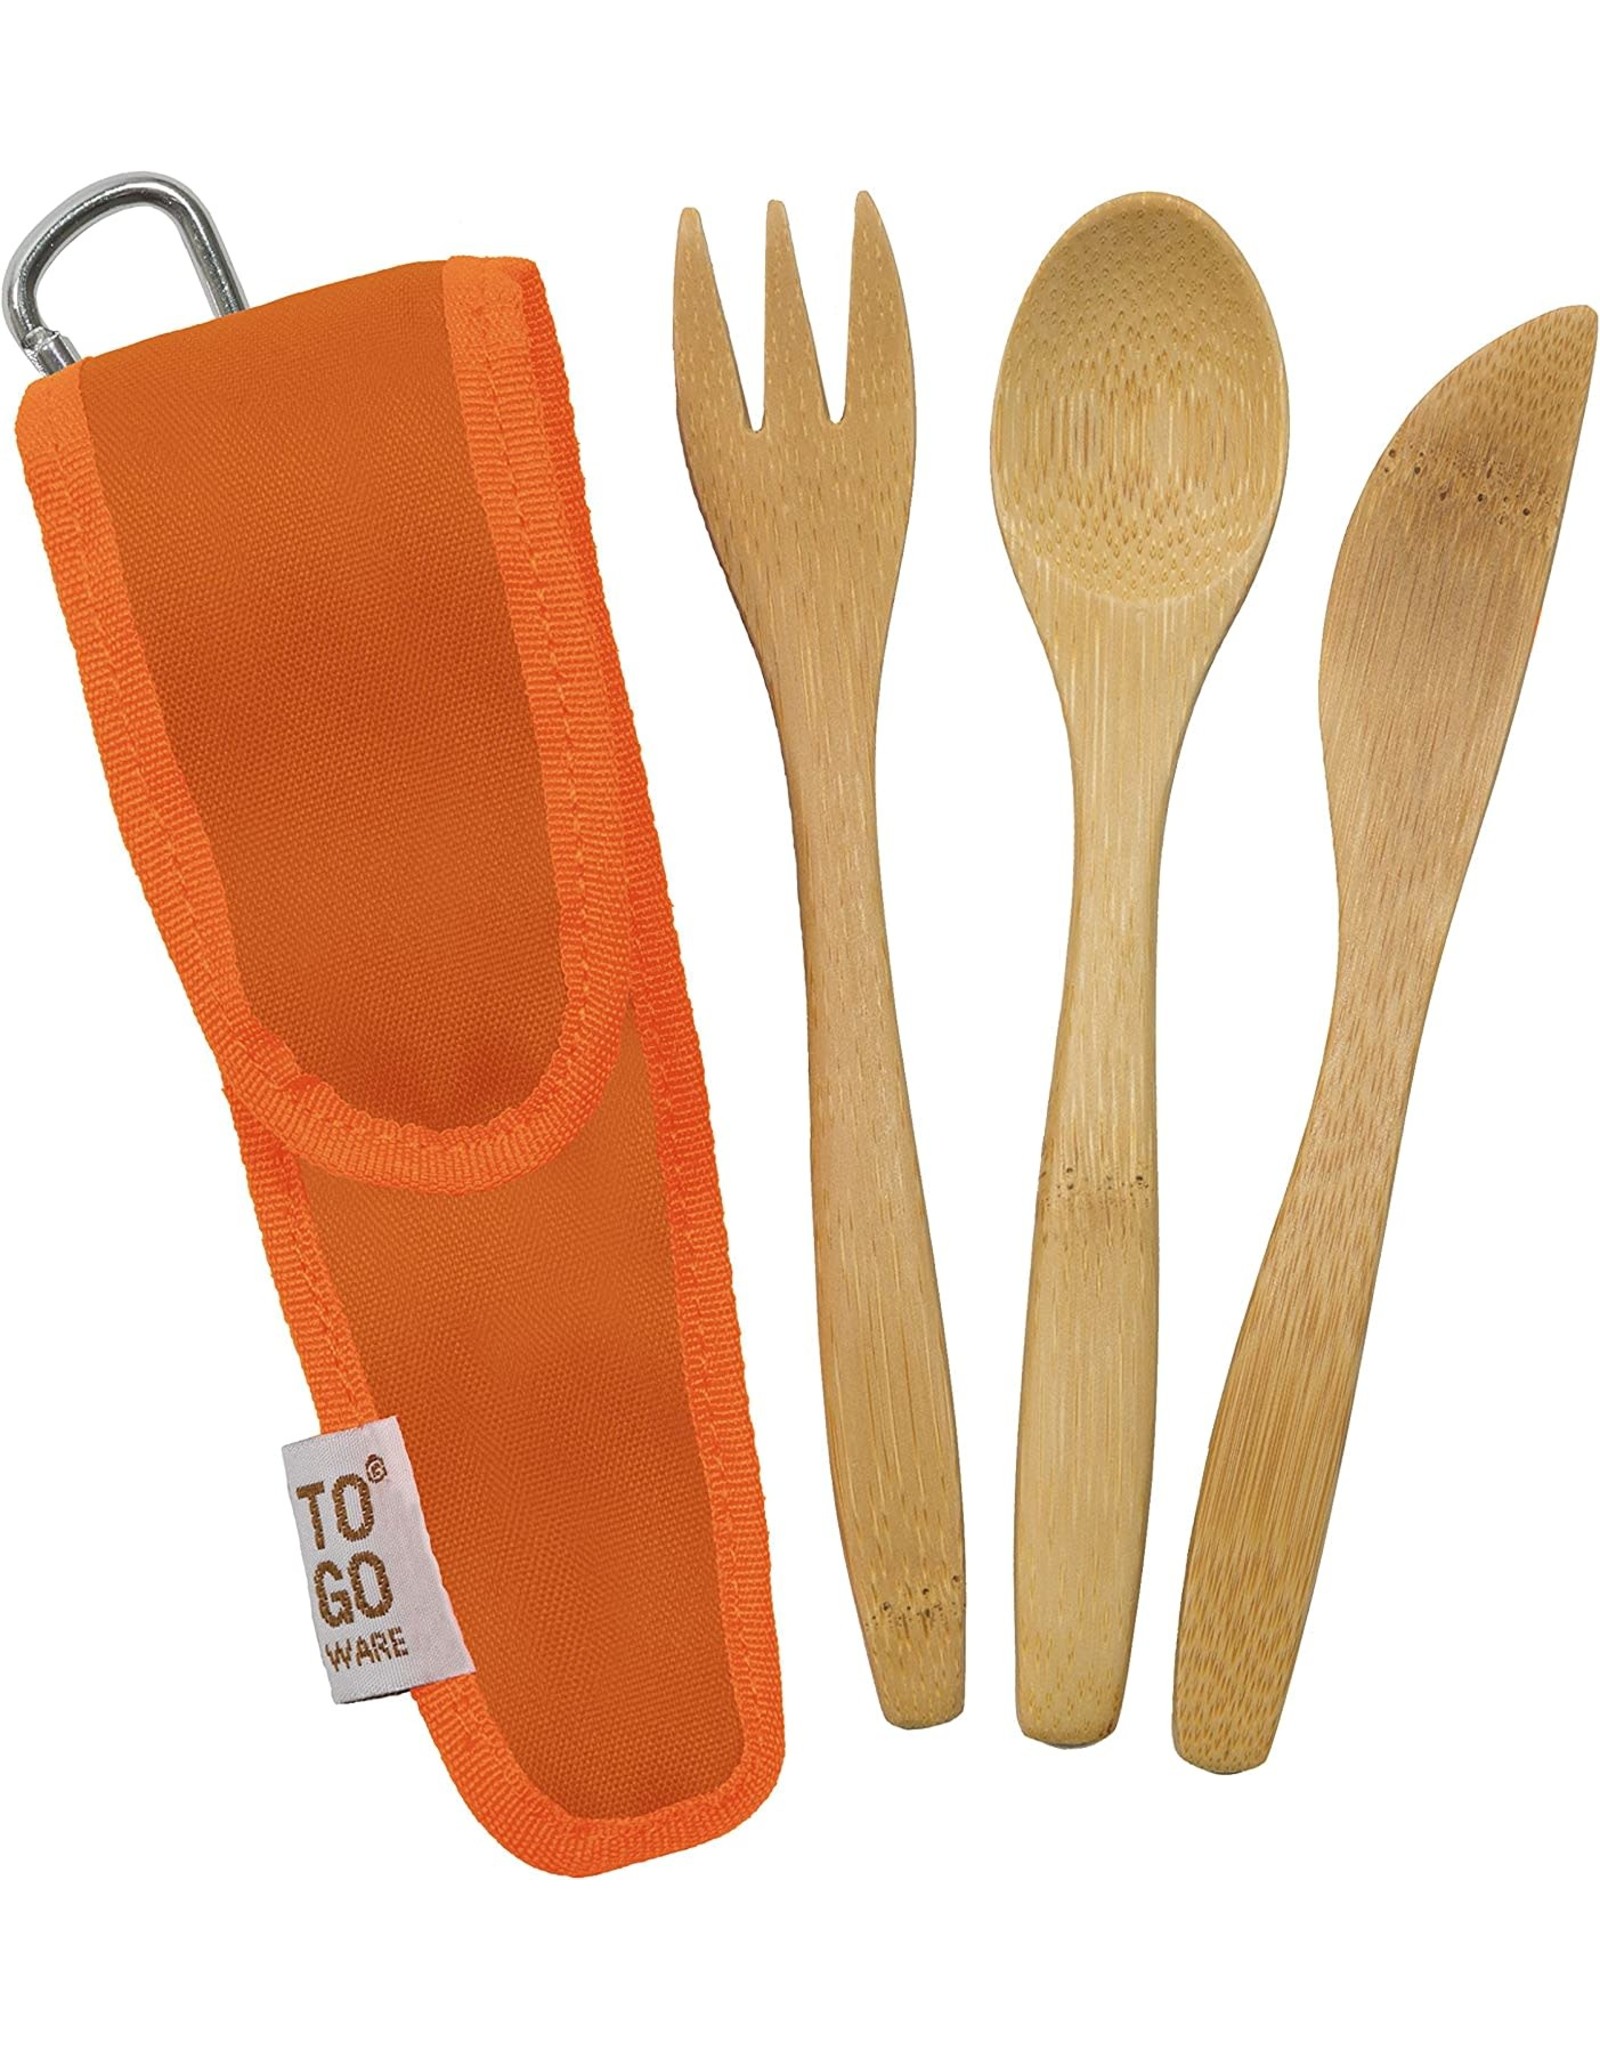 X TO-GO WARE ORANGE REUSABLE REPEAT UTENSIL SETS FOR KIDS